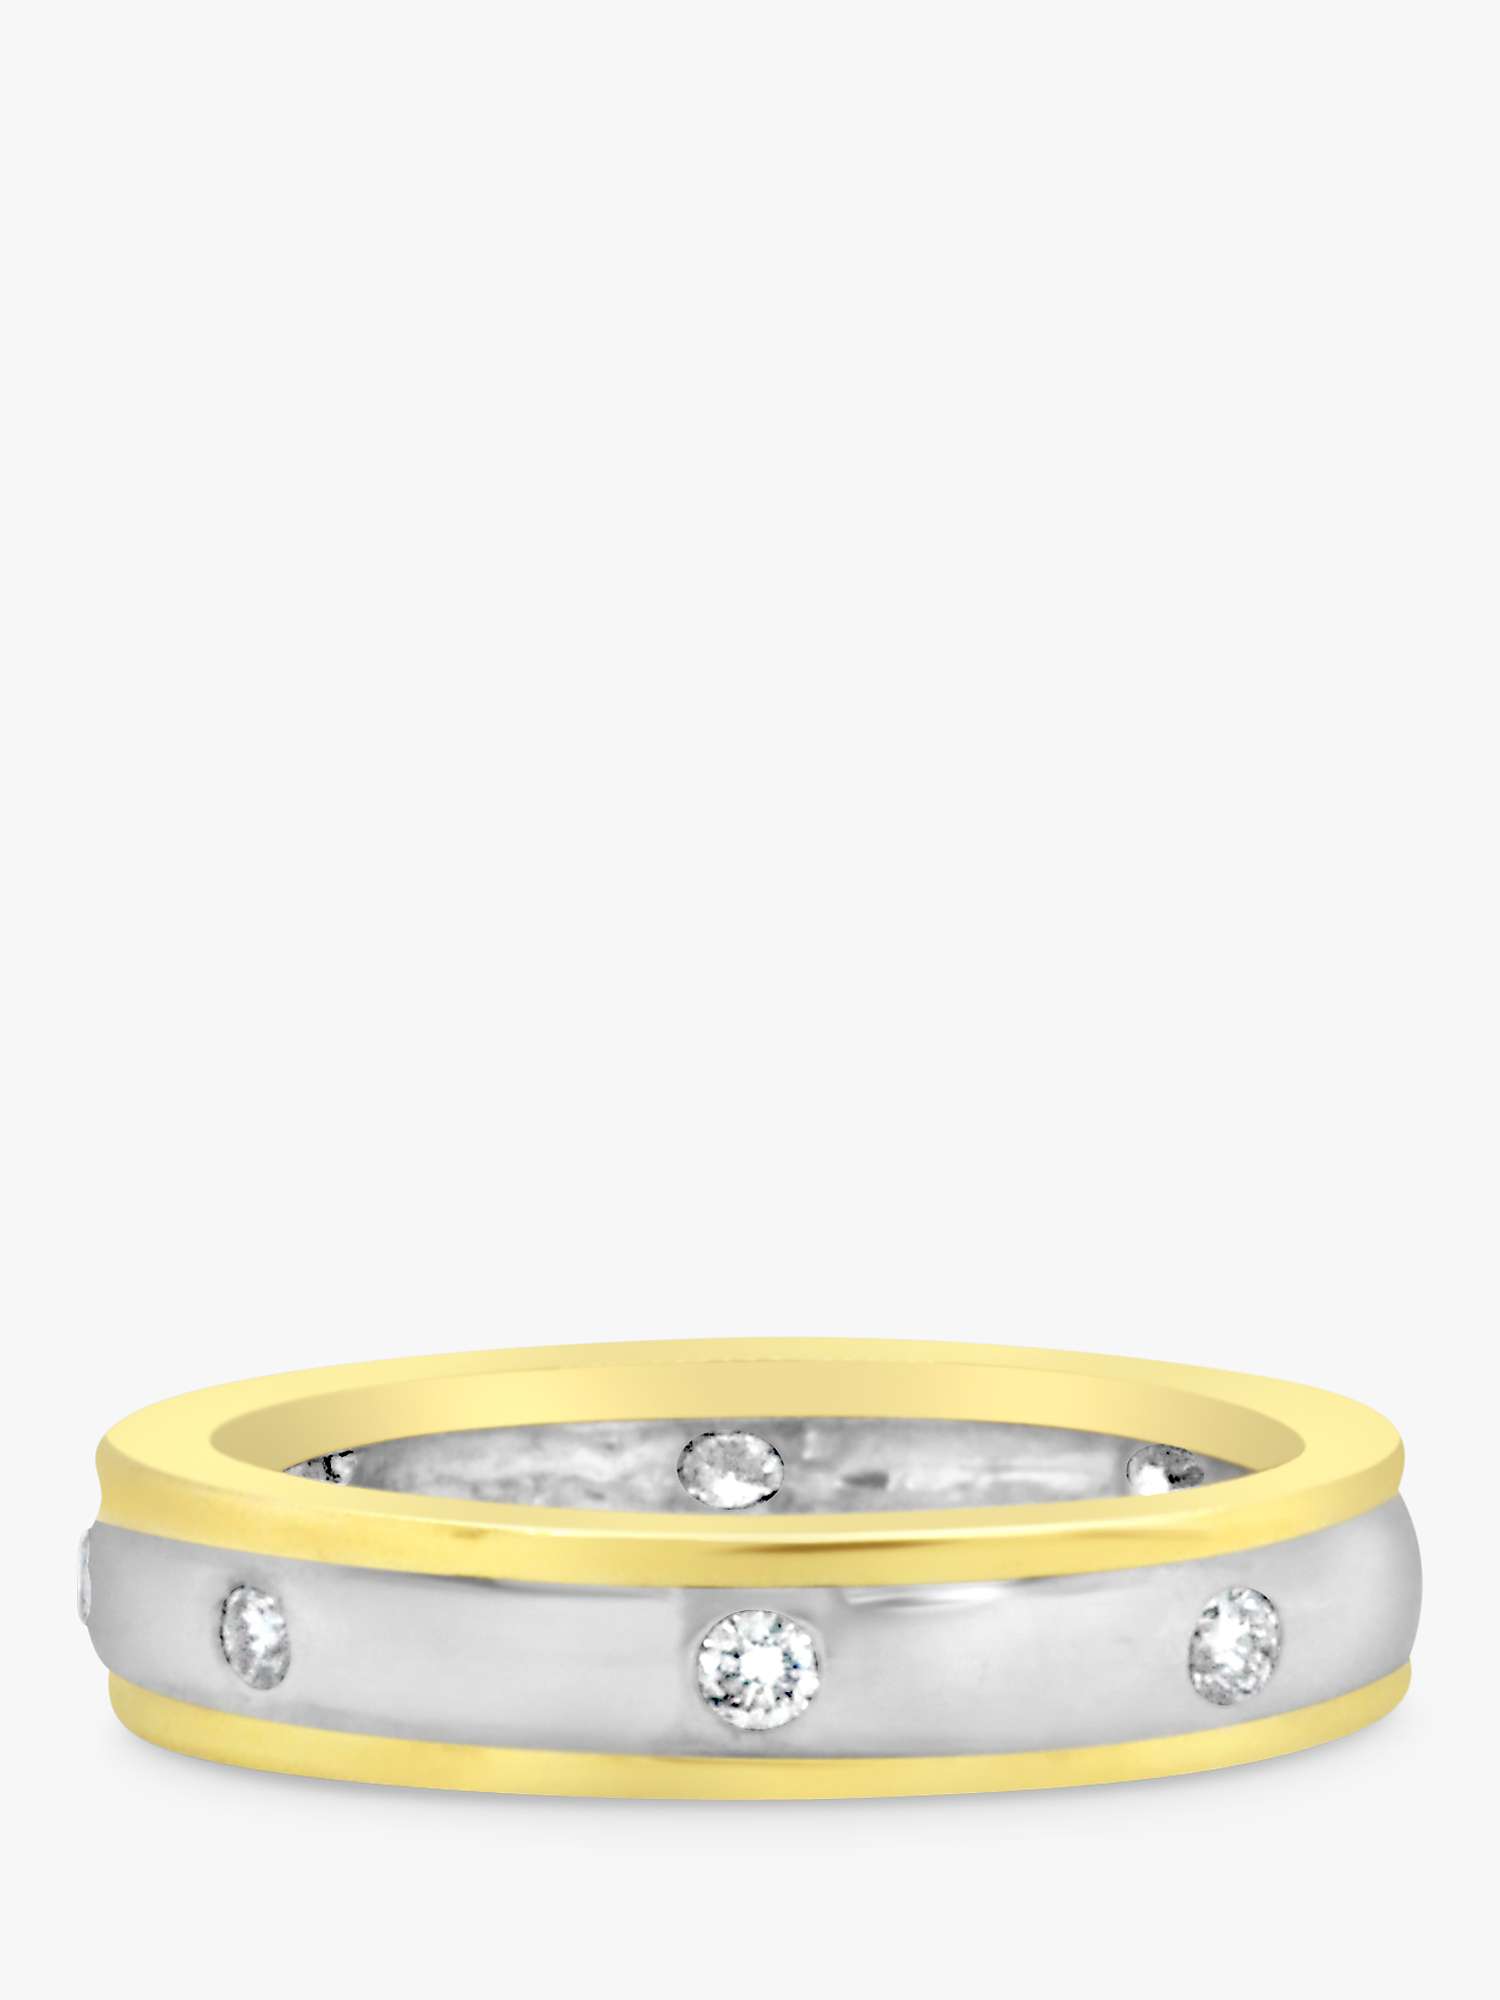 Buy Milton & Humble Jewellery Second Hand 9ct White and Yellow Gold Diamond Band Ring Online at johnlewis.com